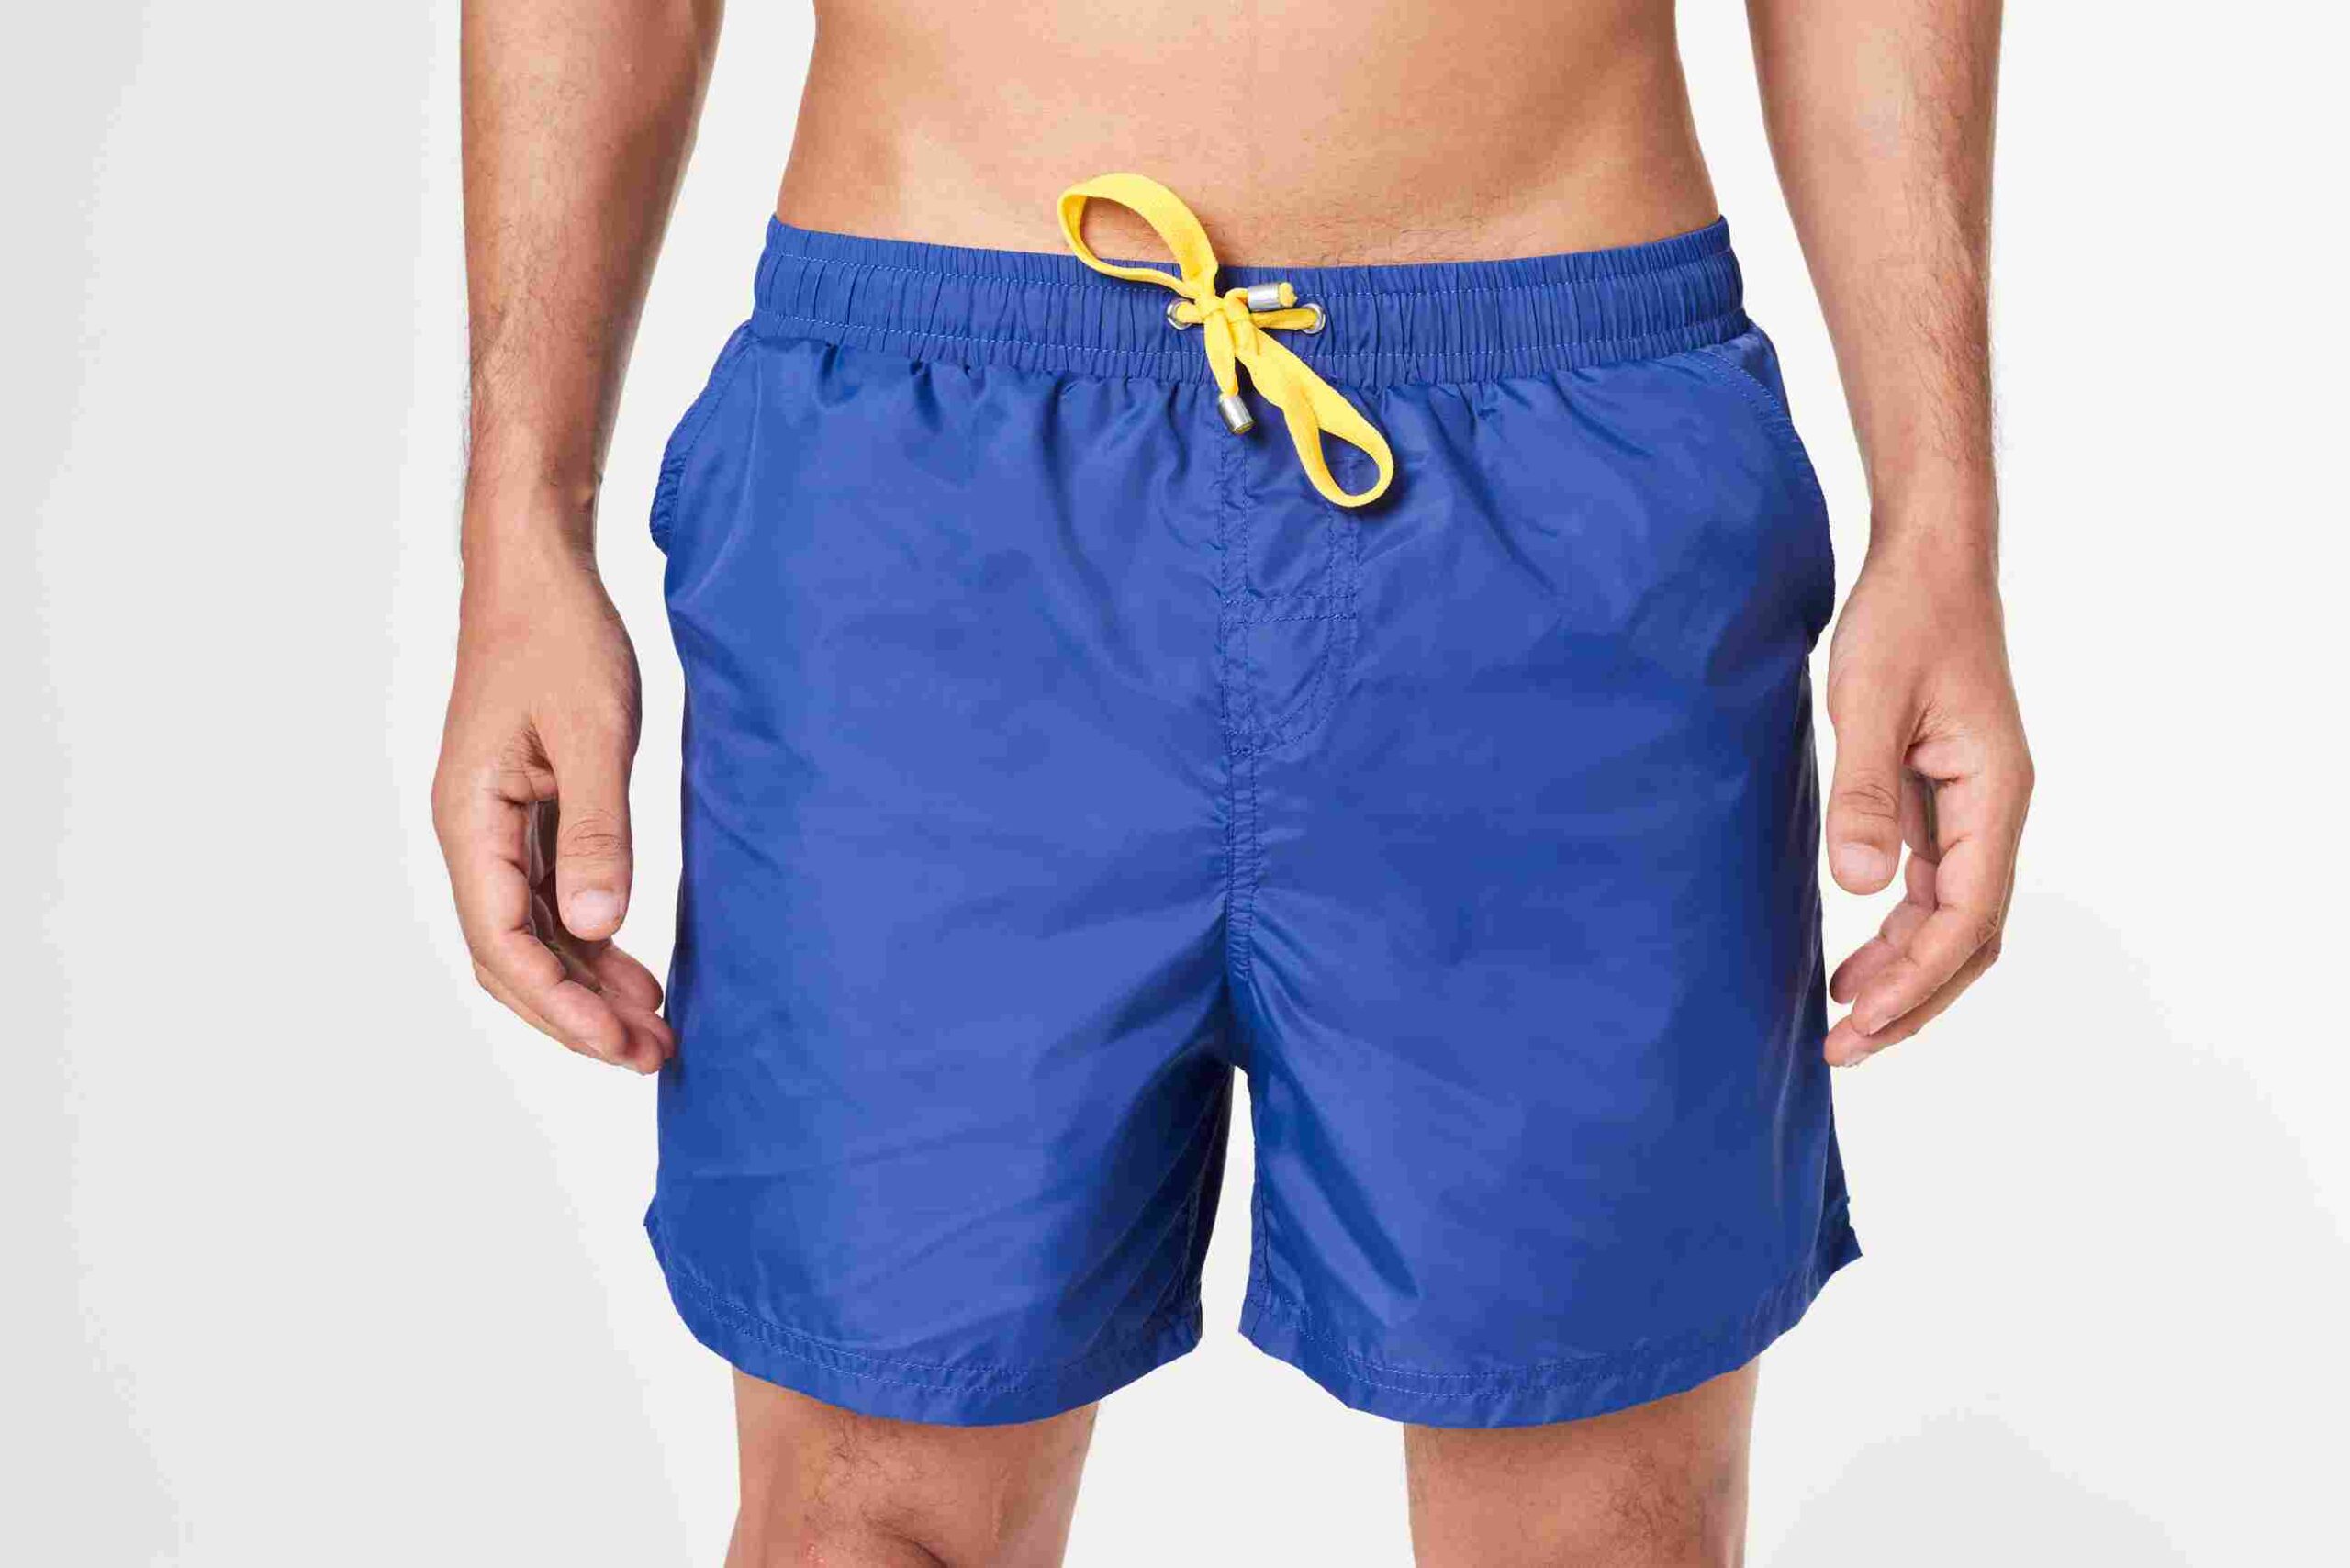 Dpassion Men Sports Shorts Do You Really Need It This Will Help You Decide